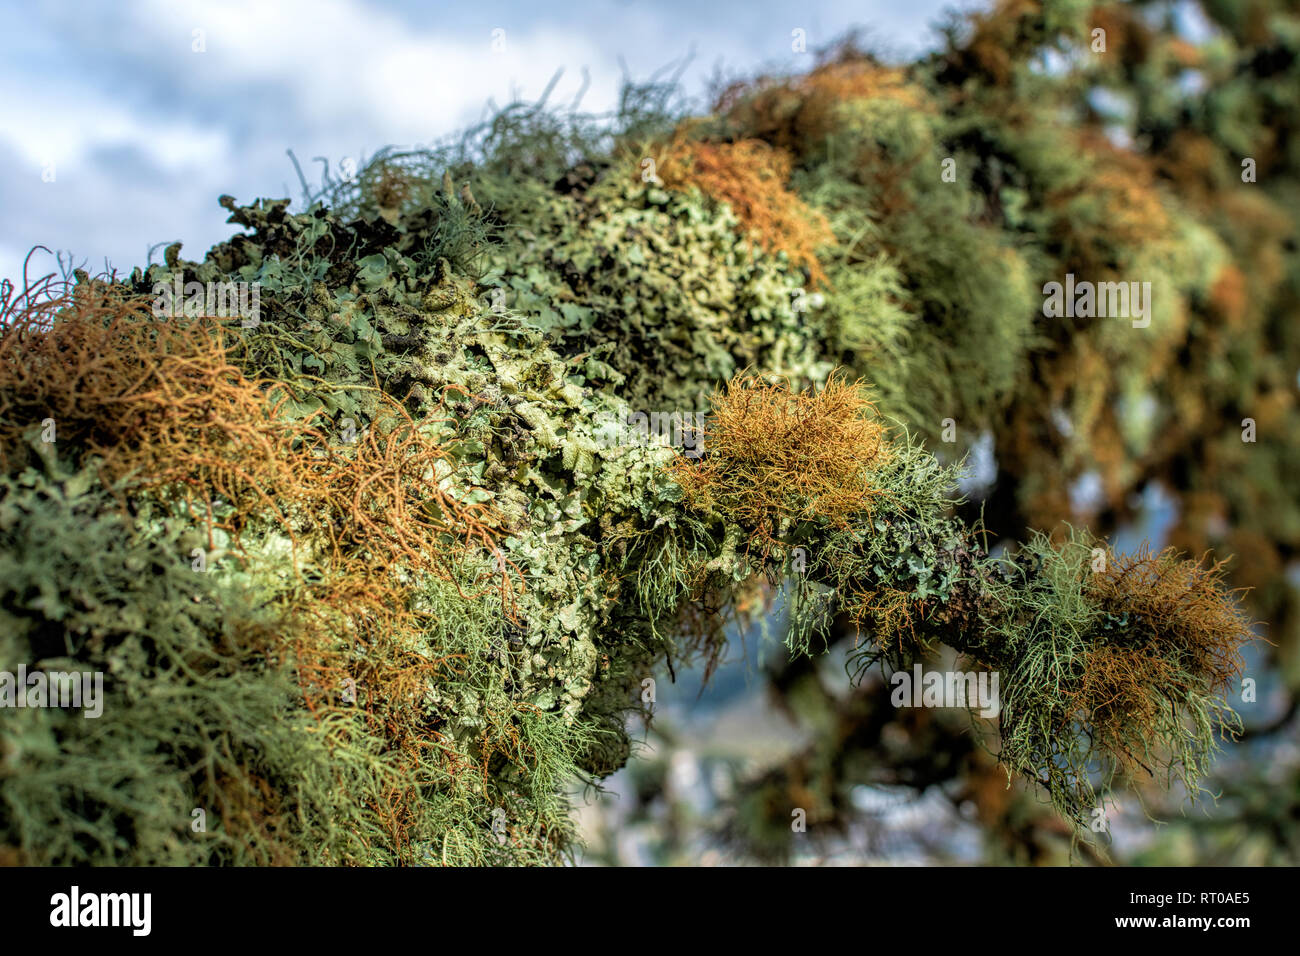 Close up. Detail of green and grey dry moss and lichen completely covering tree branch Stock Photo